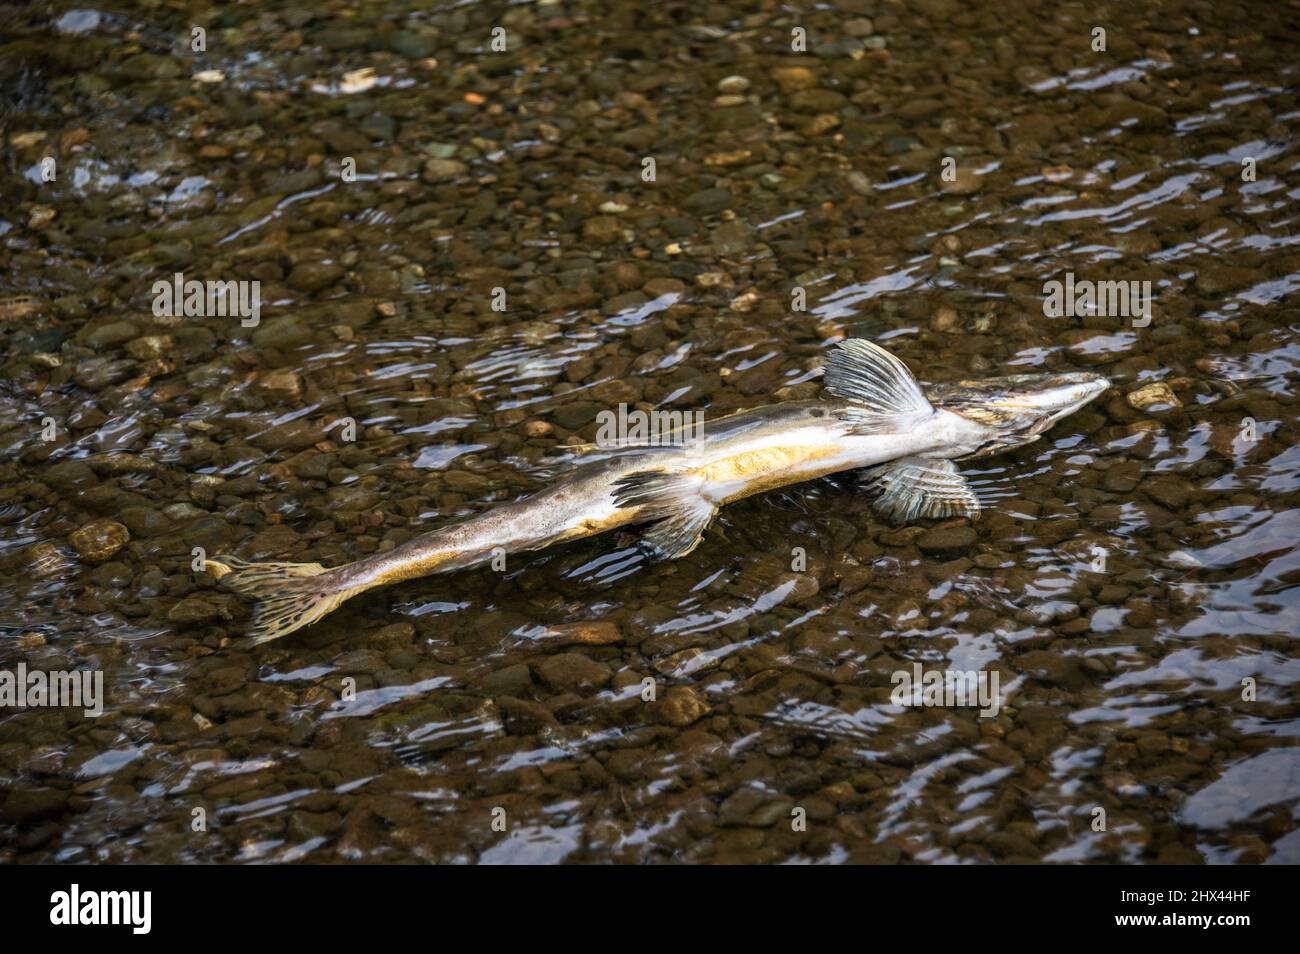 dead Pacific salmon after spawning in the Green River of Washington state Stock Photo